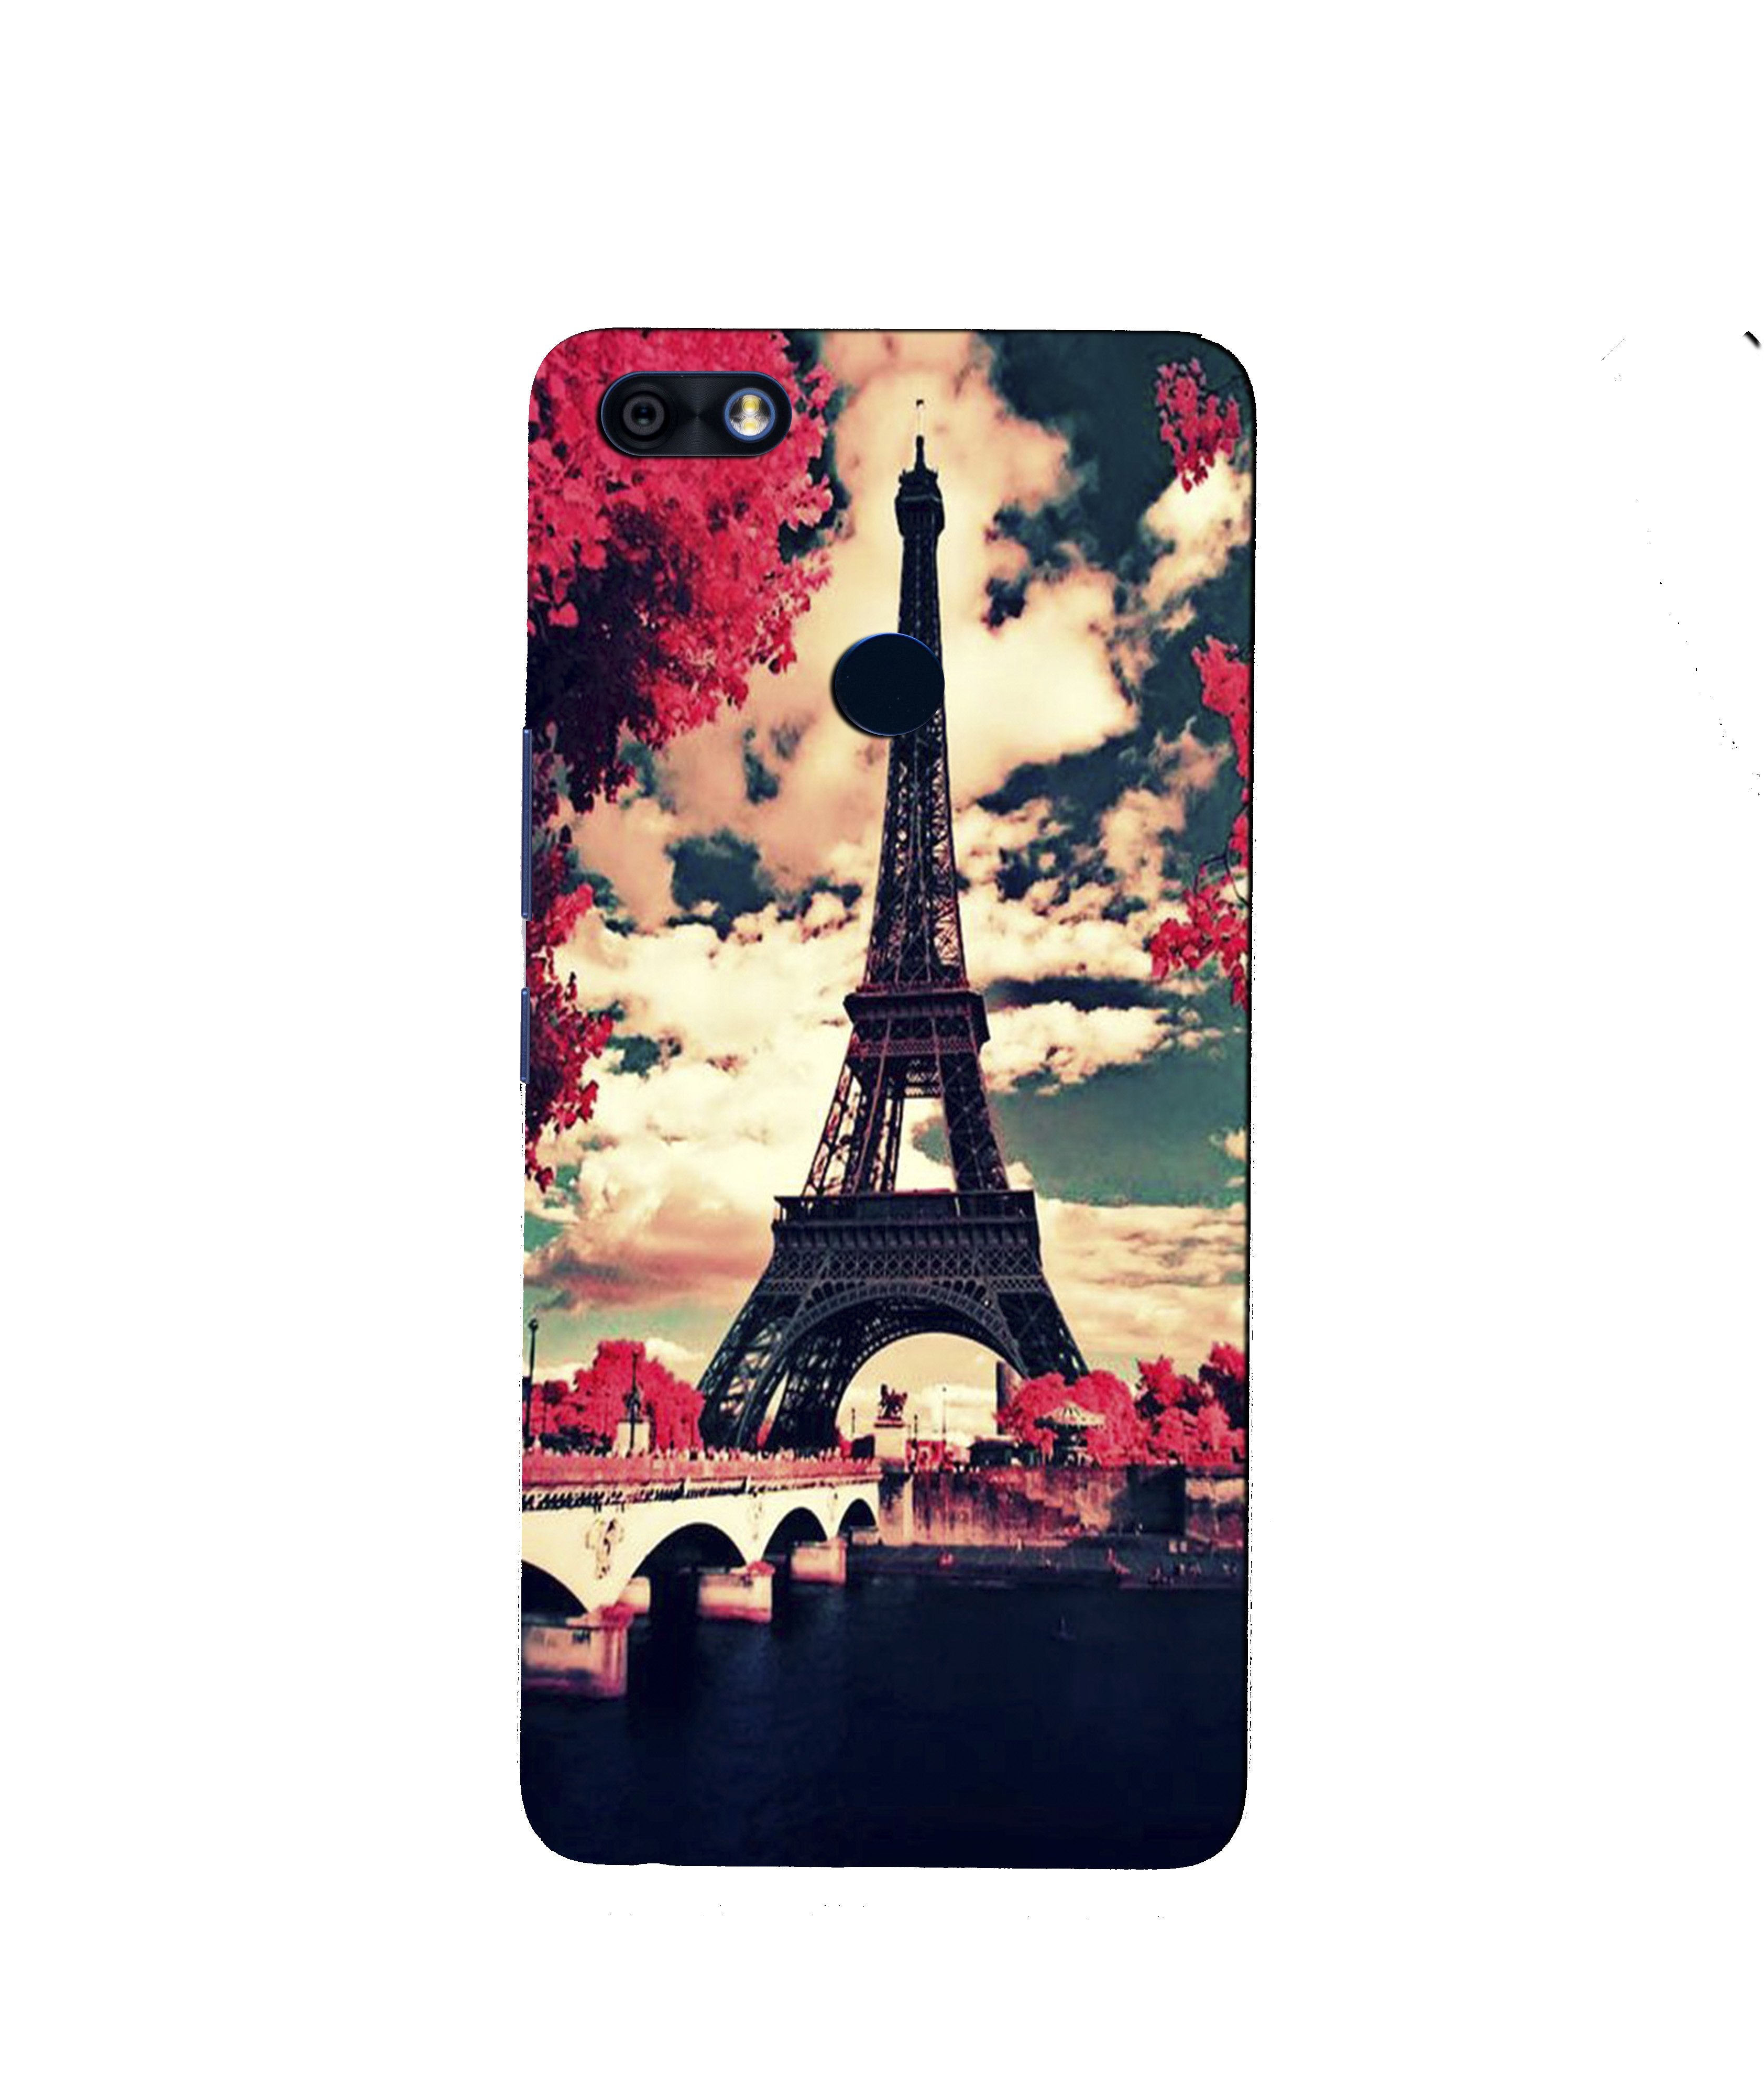 Eiffel Tower Case for Infinix Note 5 / Note 5 Pro (Design No. 212)